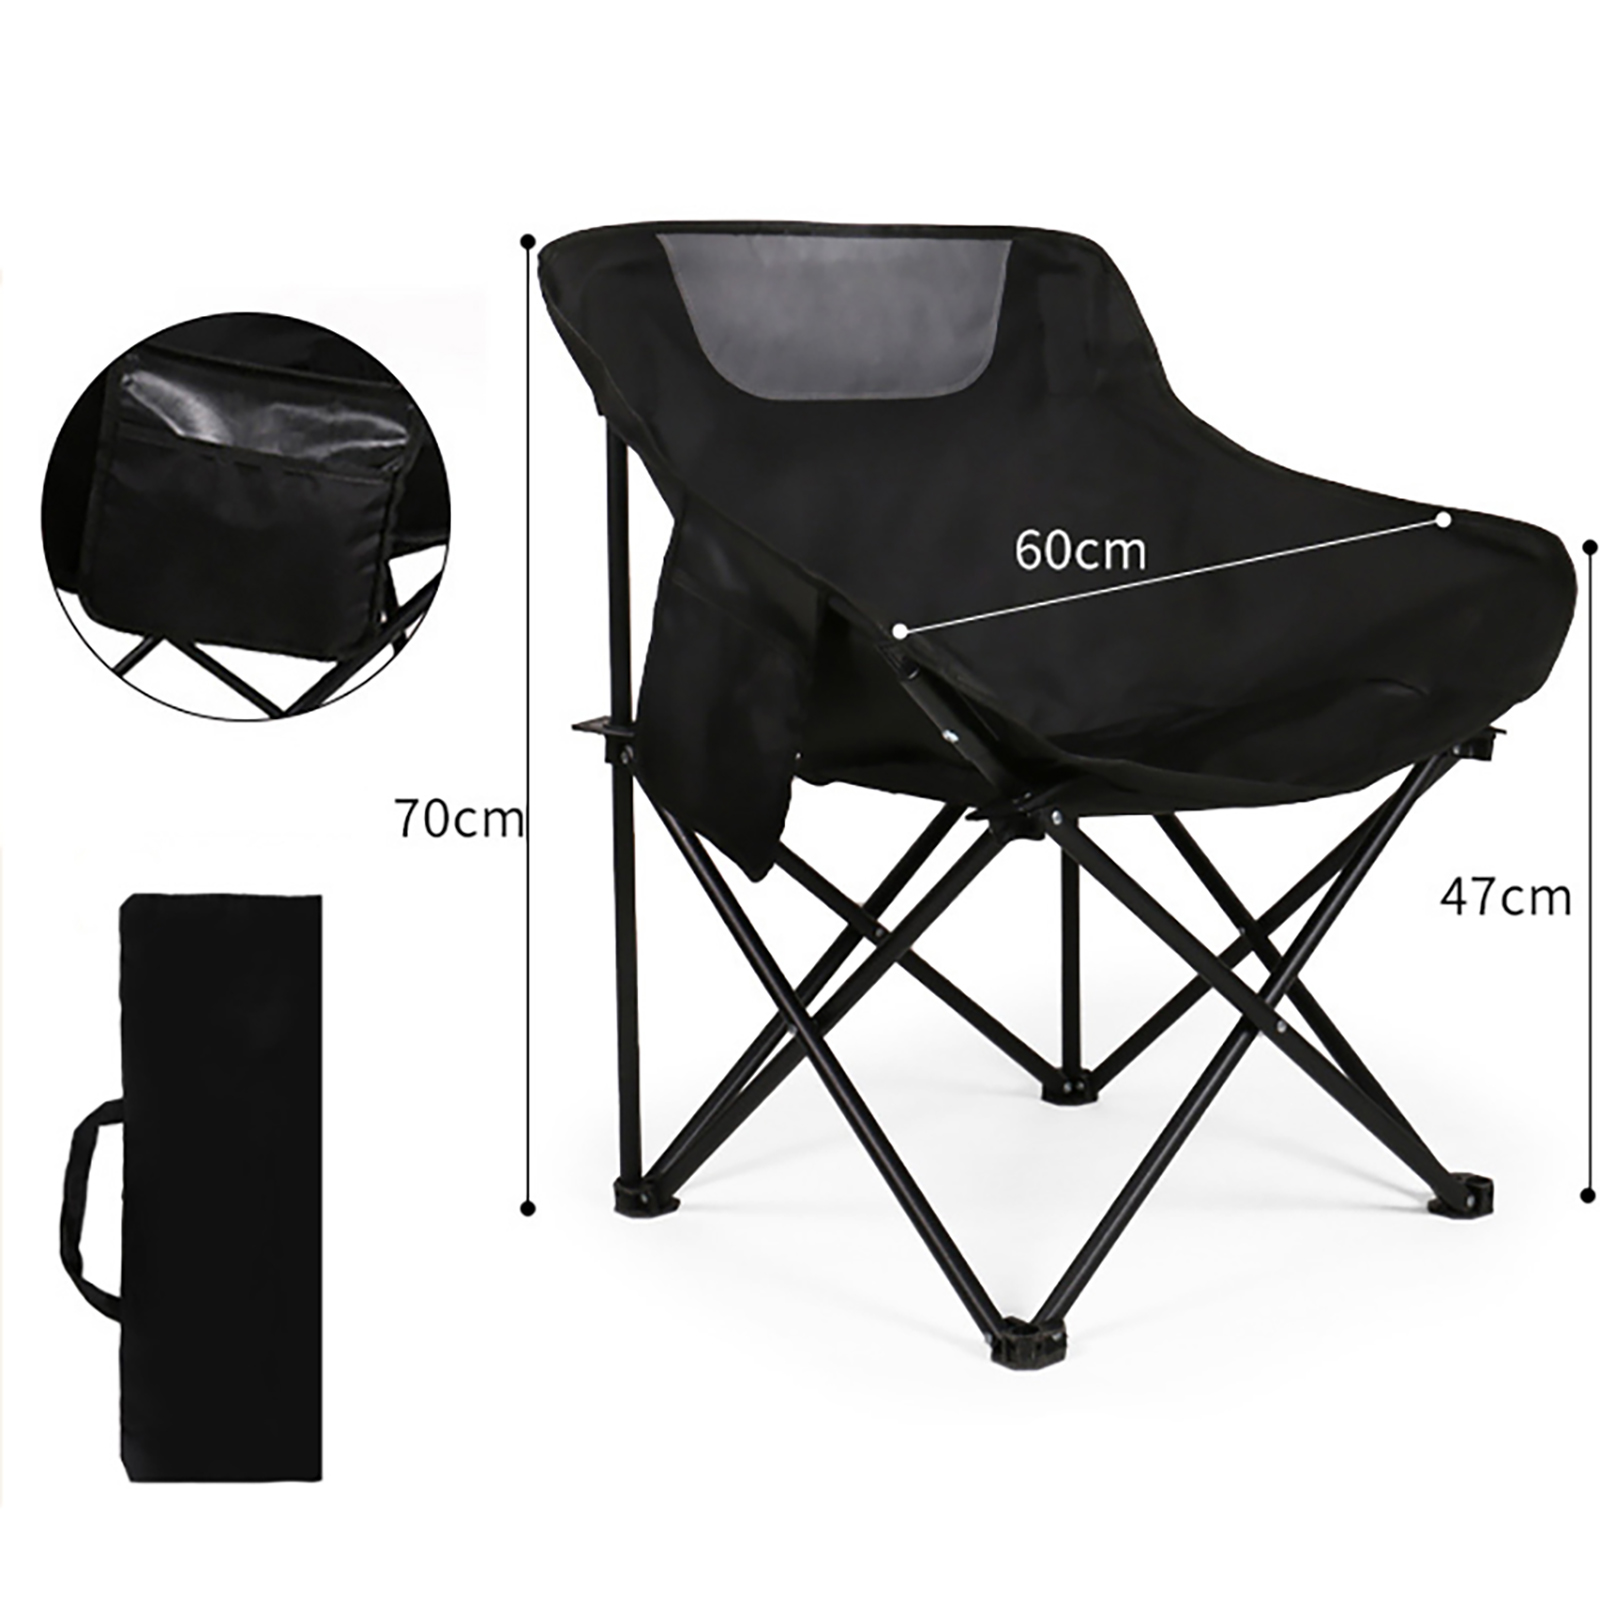 Camping Chairs Lawn Chairs Portable Chair Support 150kg Foldable Chair Backpacking Chair 600D Oxford Cloth + Aluminum Alloy